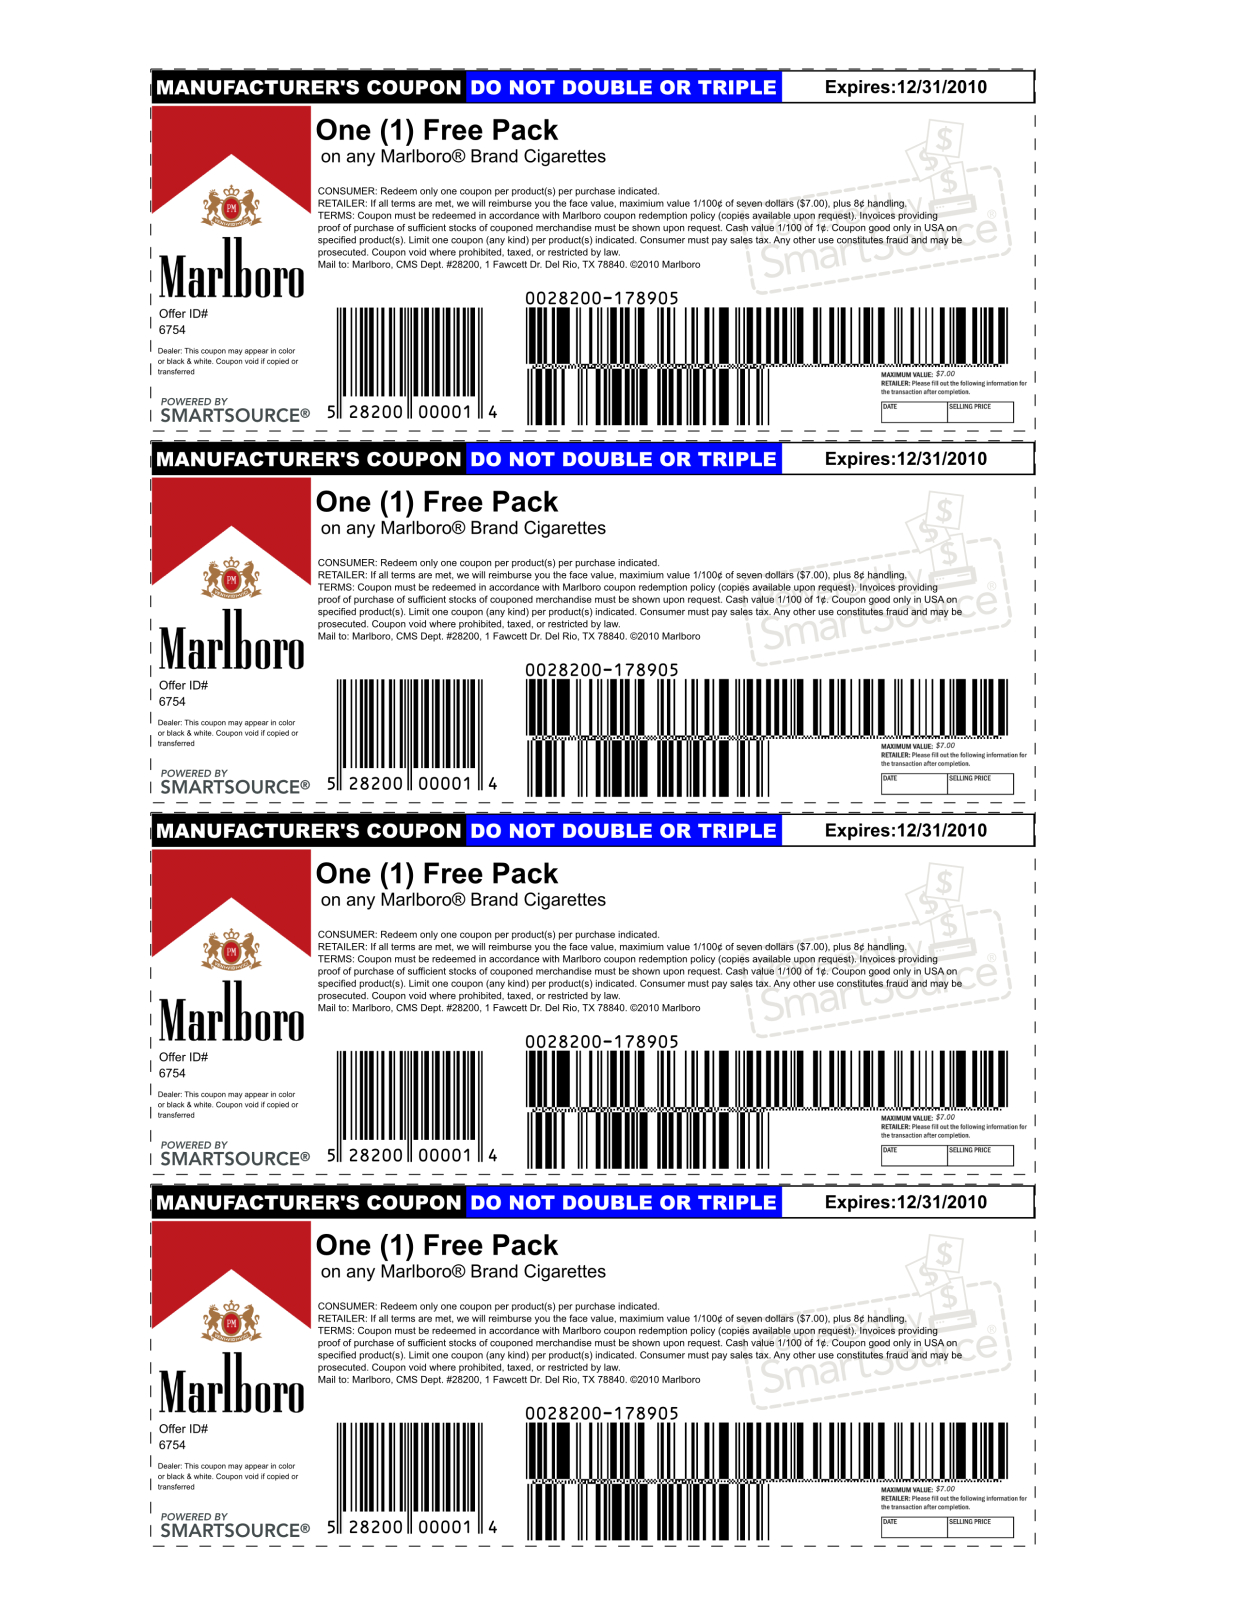 Marlboro Coupons Printable 2013 | Is Using A Possibly Fake Coupon - Free Printable Cigarette Coupons